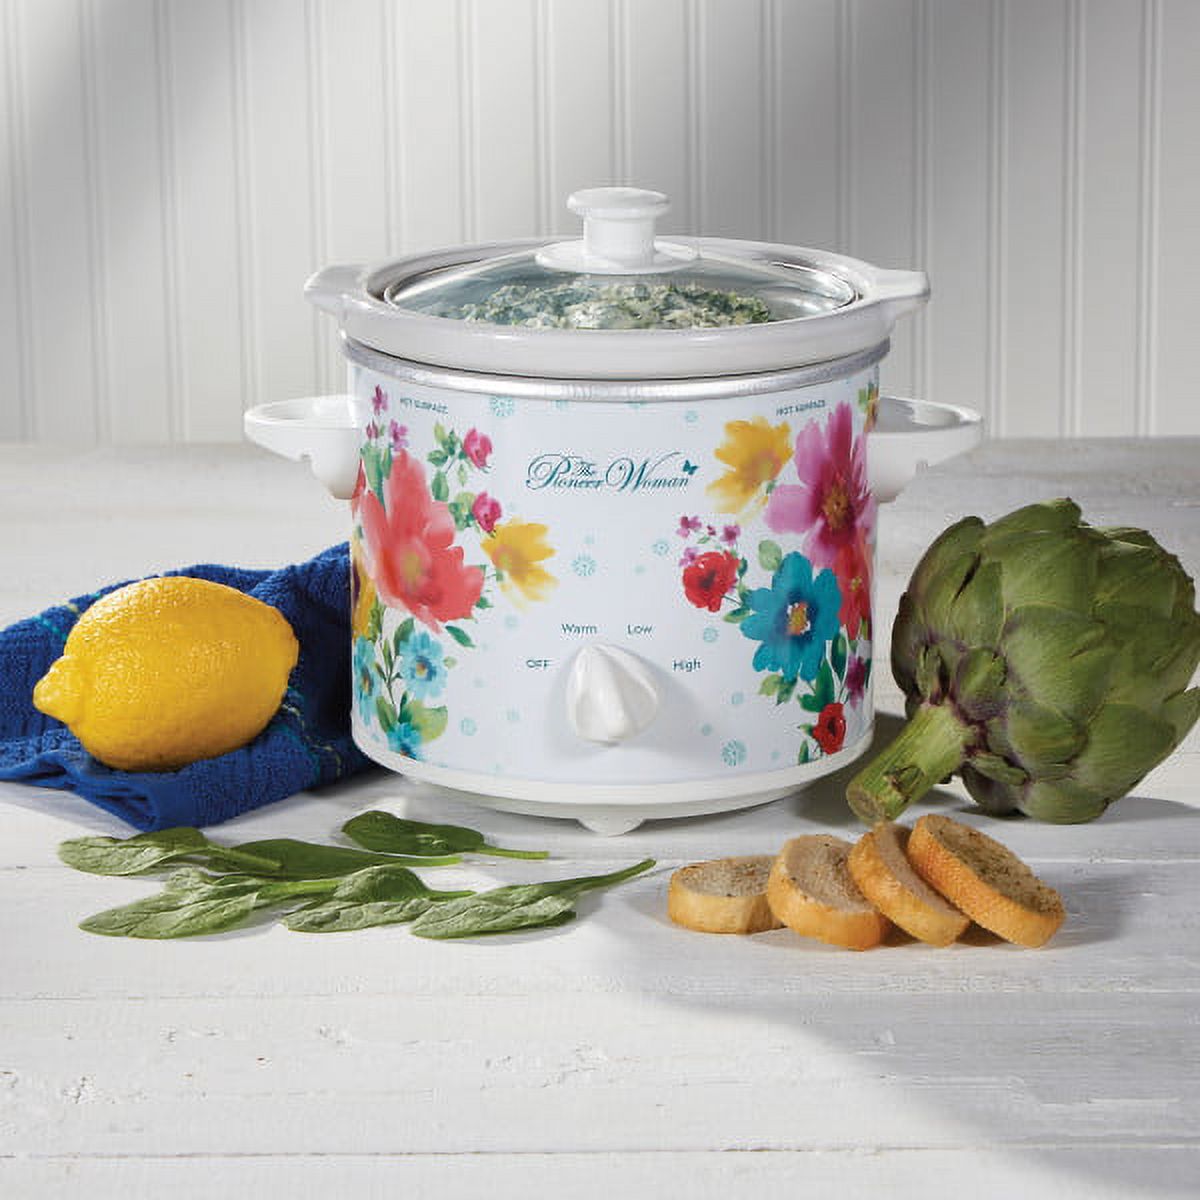 The Pioneer Woman Slow Cooker 1.5 Quart Twin Pack, Breezy Blossom and Teal Gingham, 33018 - image 5 of 10